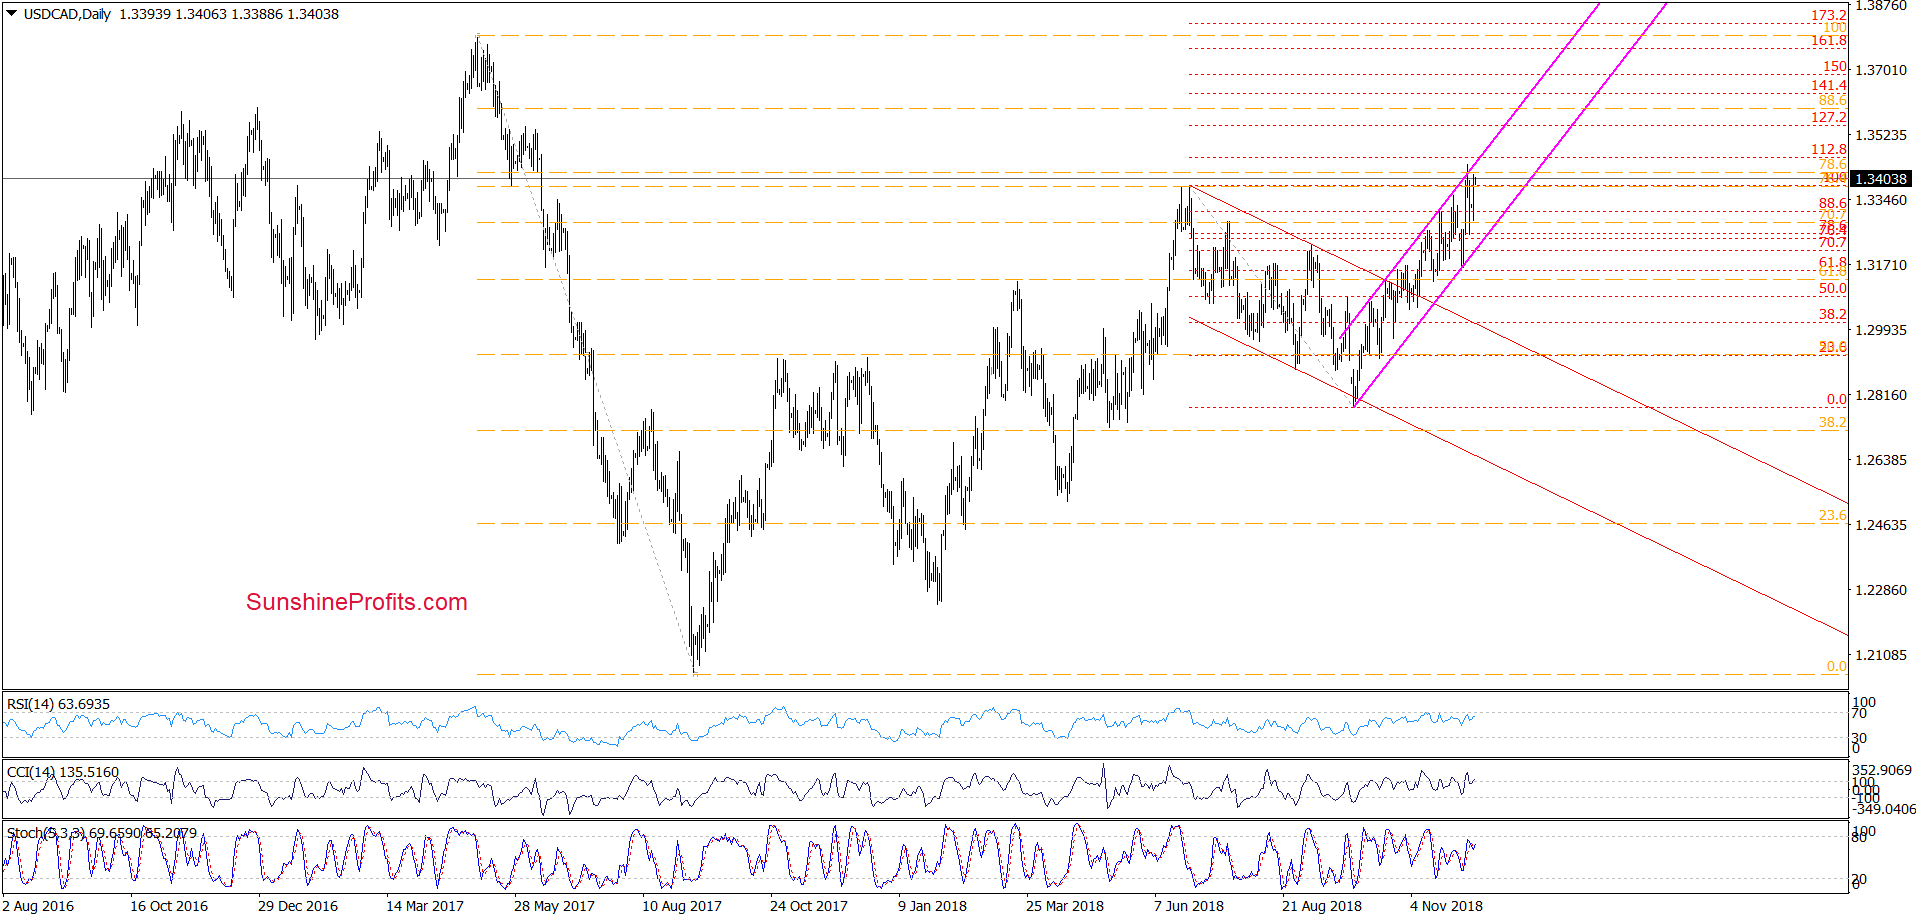 USD/CAD - daily chart